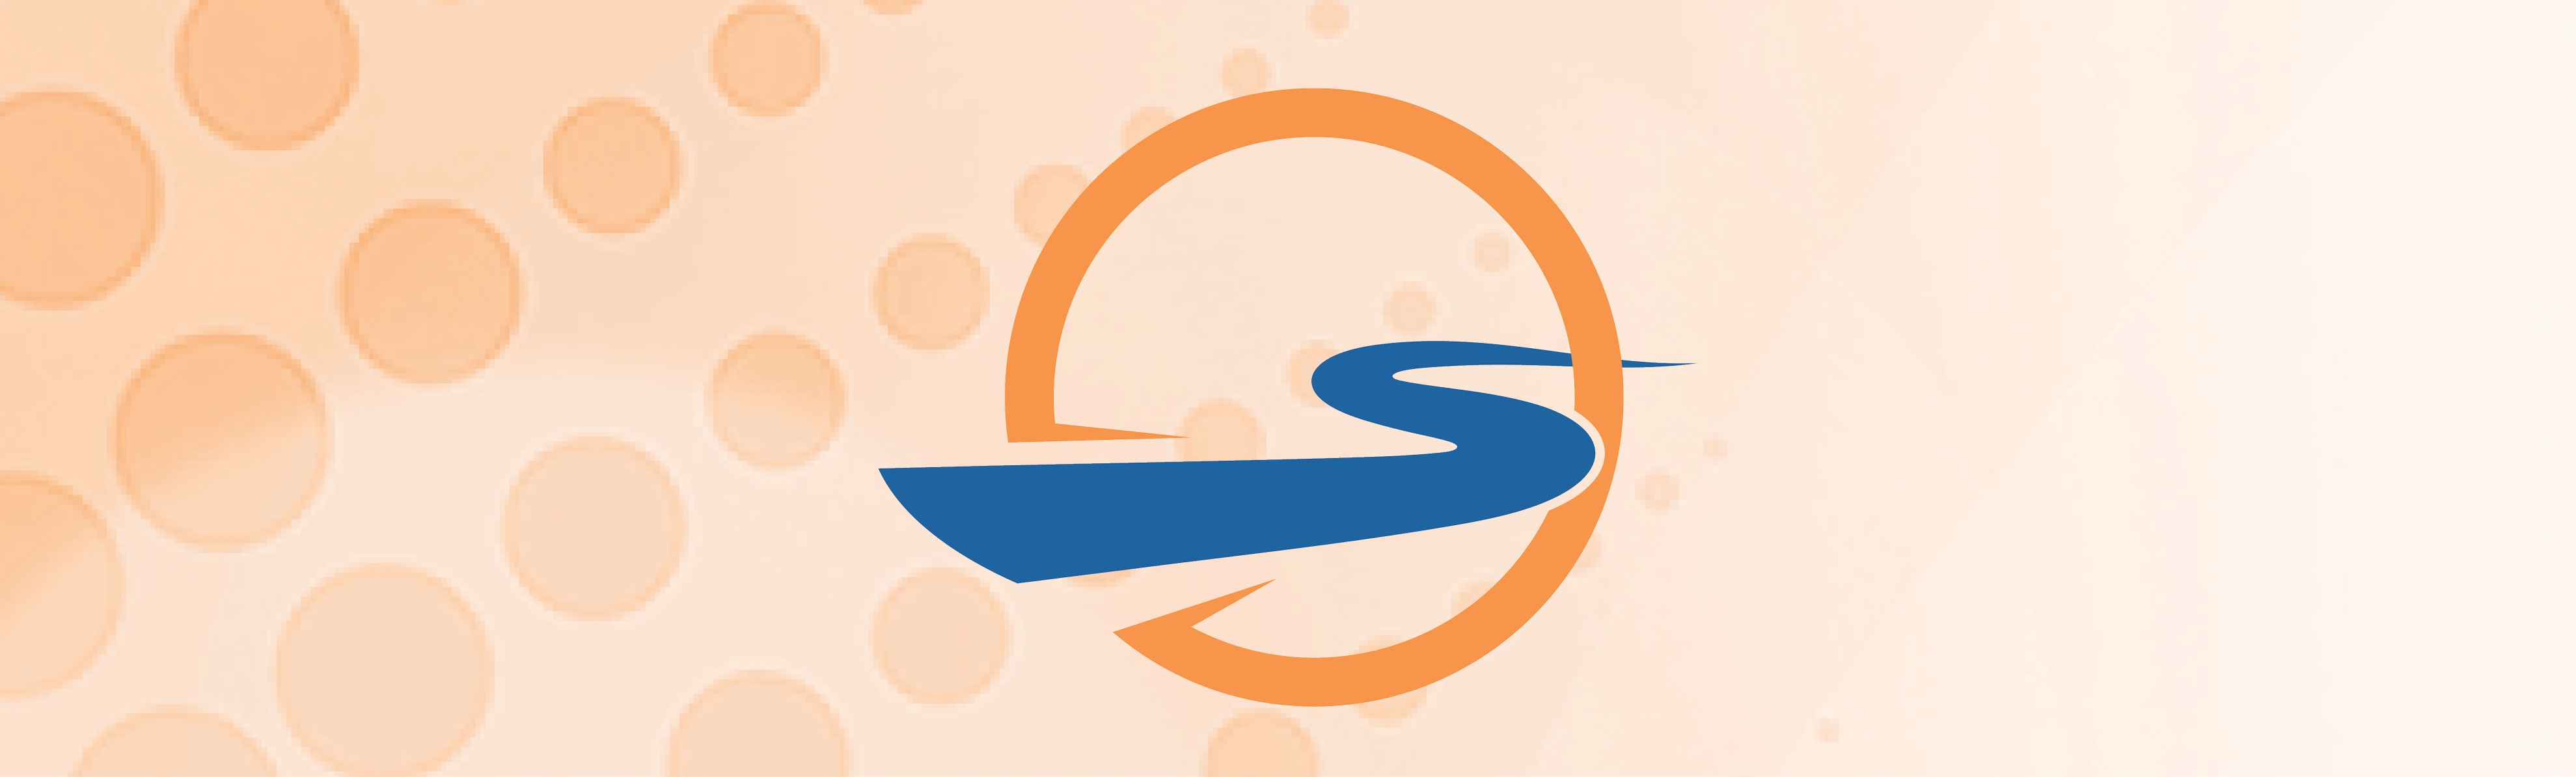 Learning Plans logo with blue winding path in orange circle